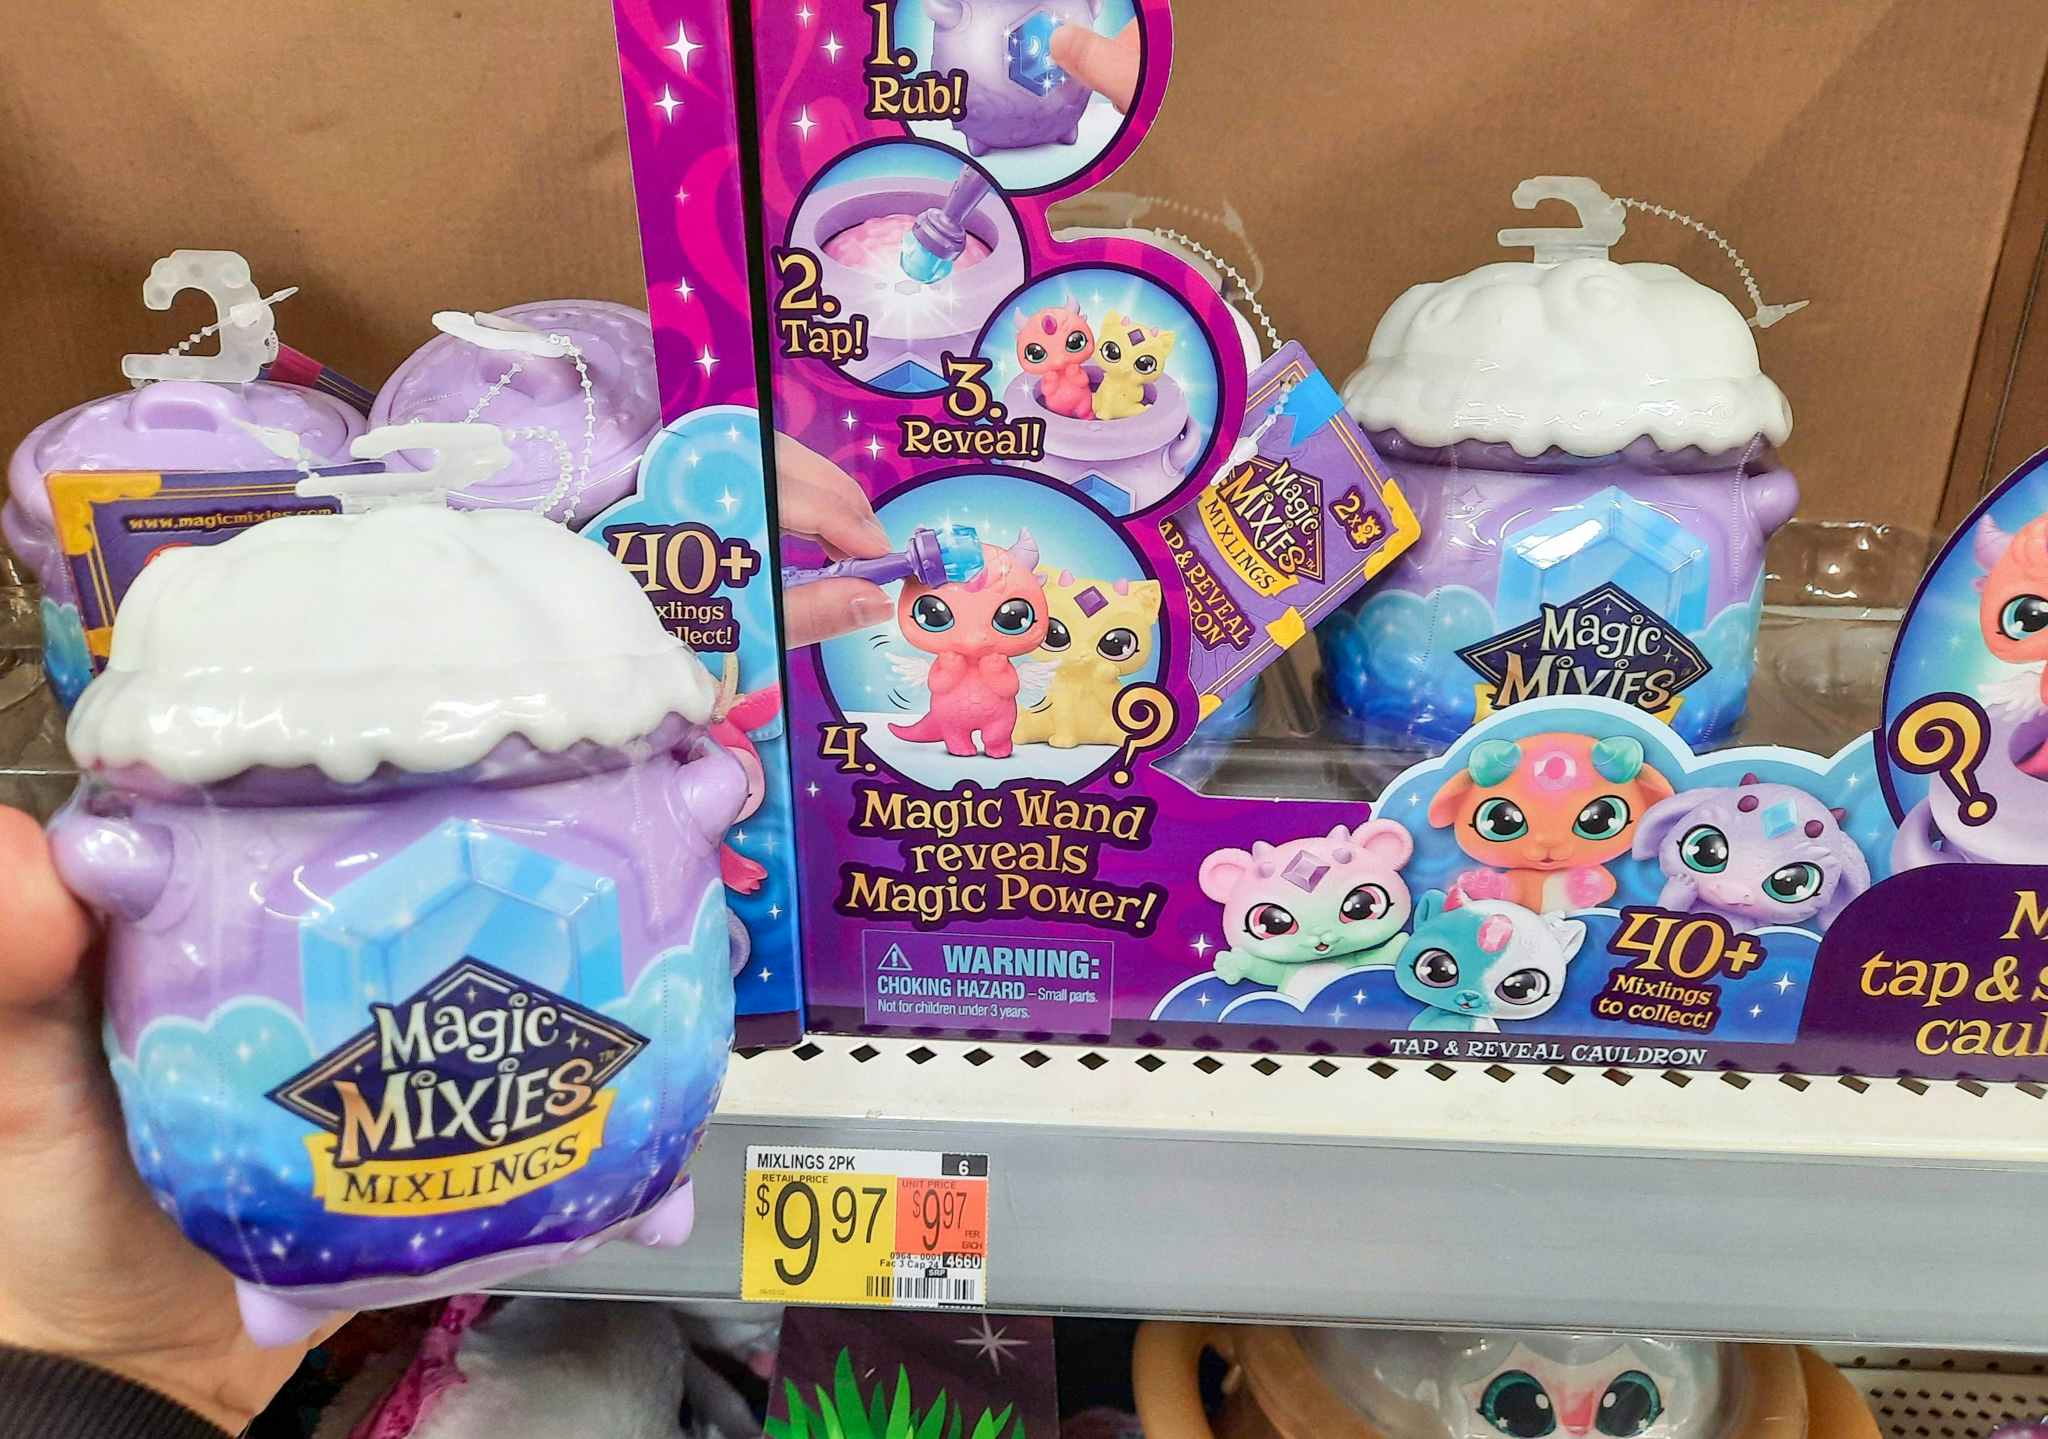 Magic Mixies Mixlings Tap & Reveal Cauldron two pack held in front of shelf at Walmart. Price tag on shelf indicates that the price is $9.97.